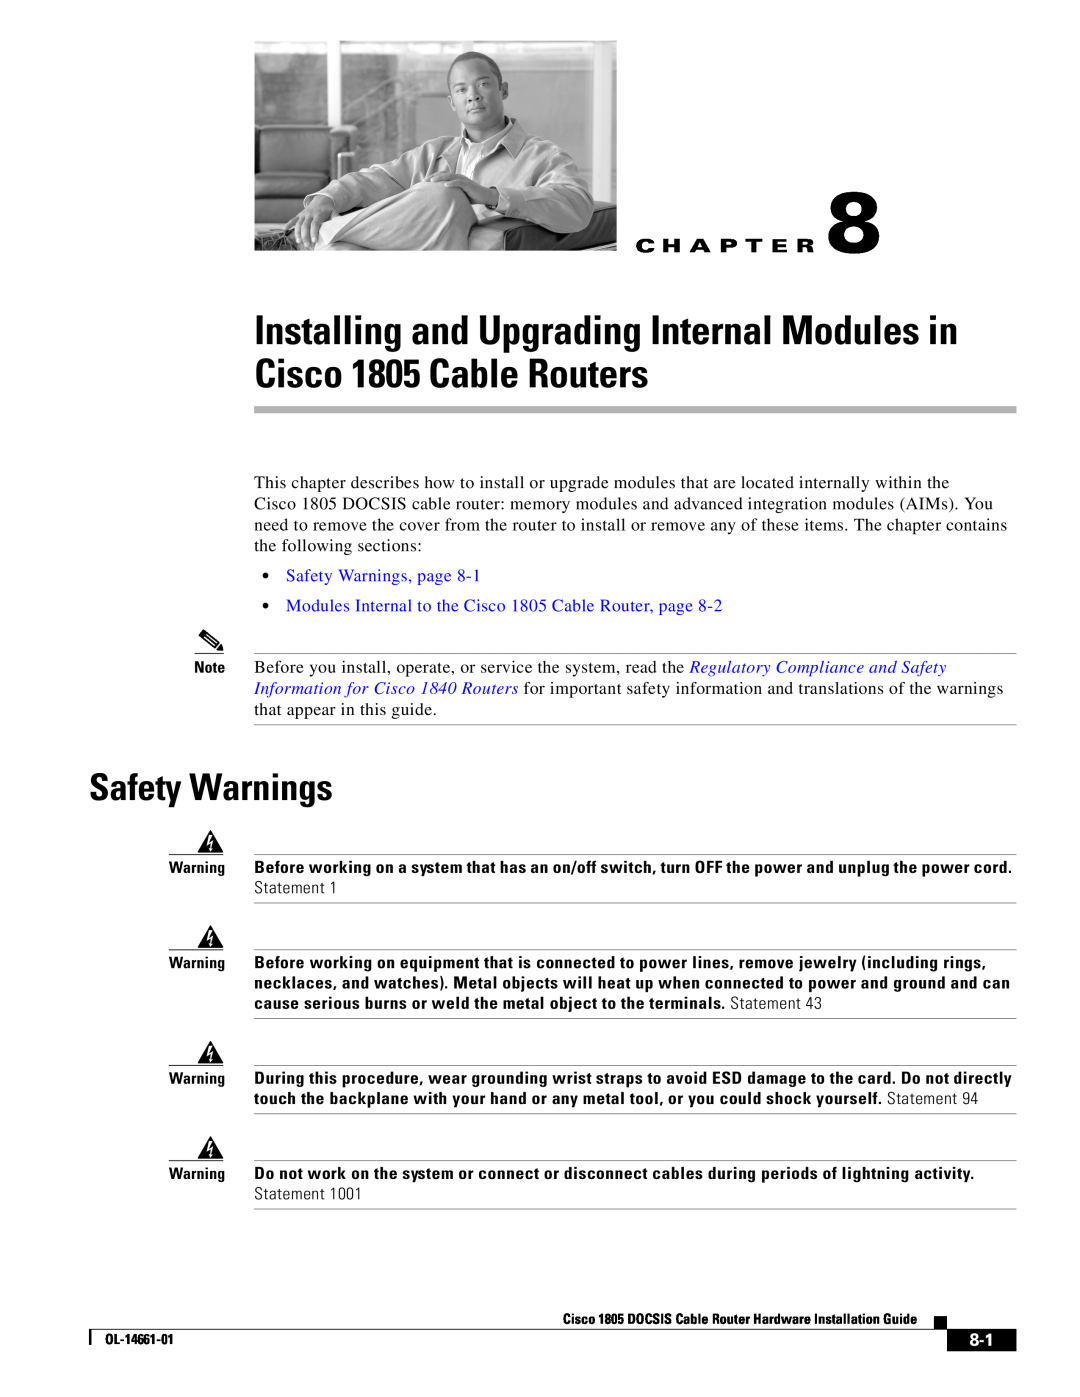 Cisco Systems manual Safety Warnings, page, Modules Internal to the Cisco 1805 Cable Router, page, C H A P T E R 